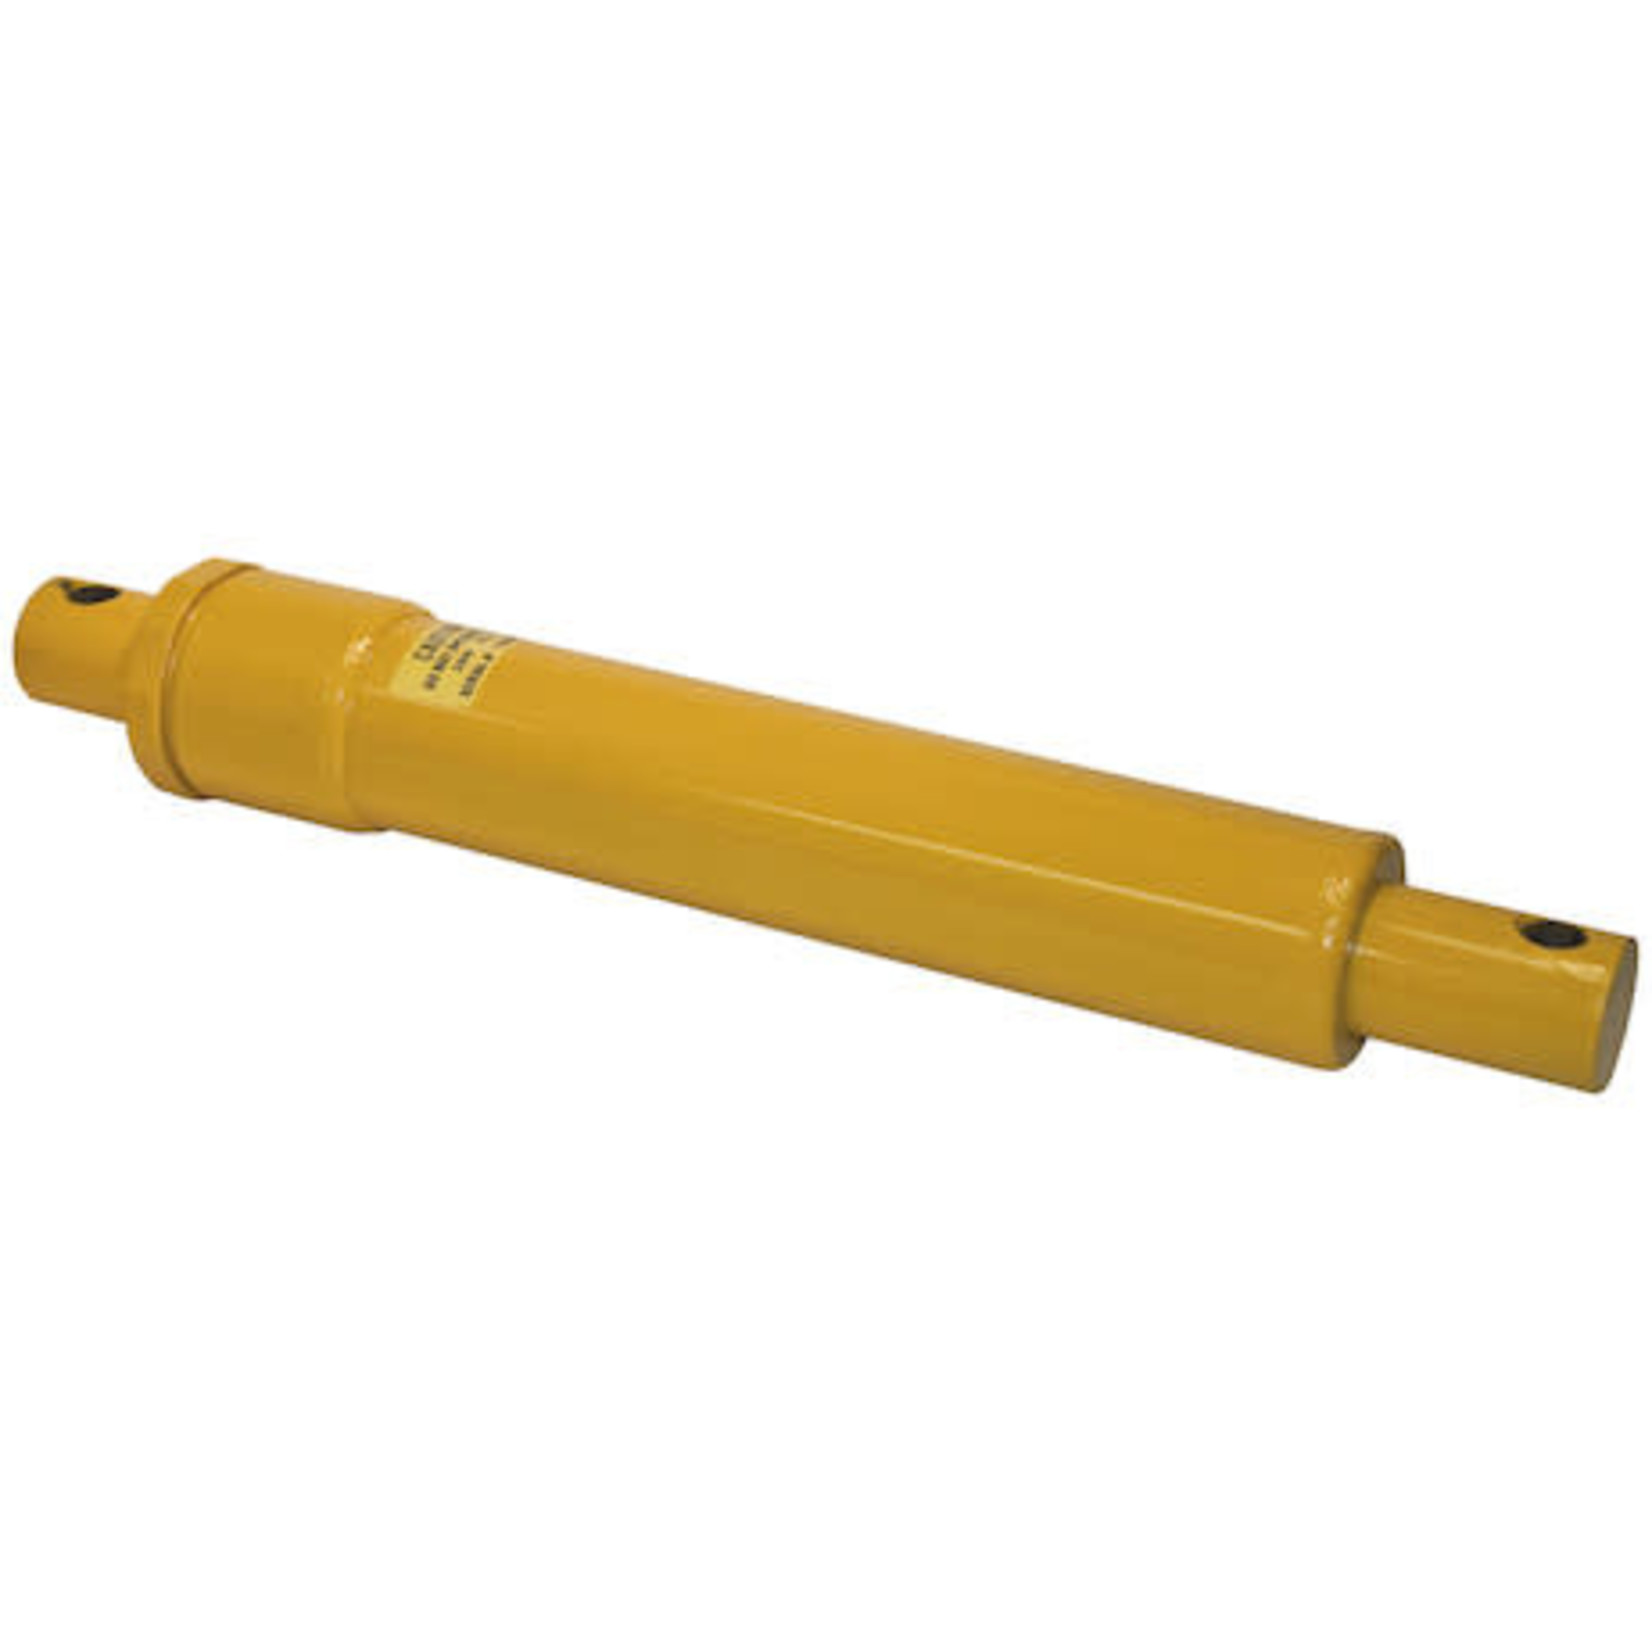 SAM SAM 2 x 12 Inch Power Angling Cylinder-Replaces Meyer #05752